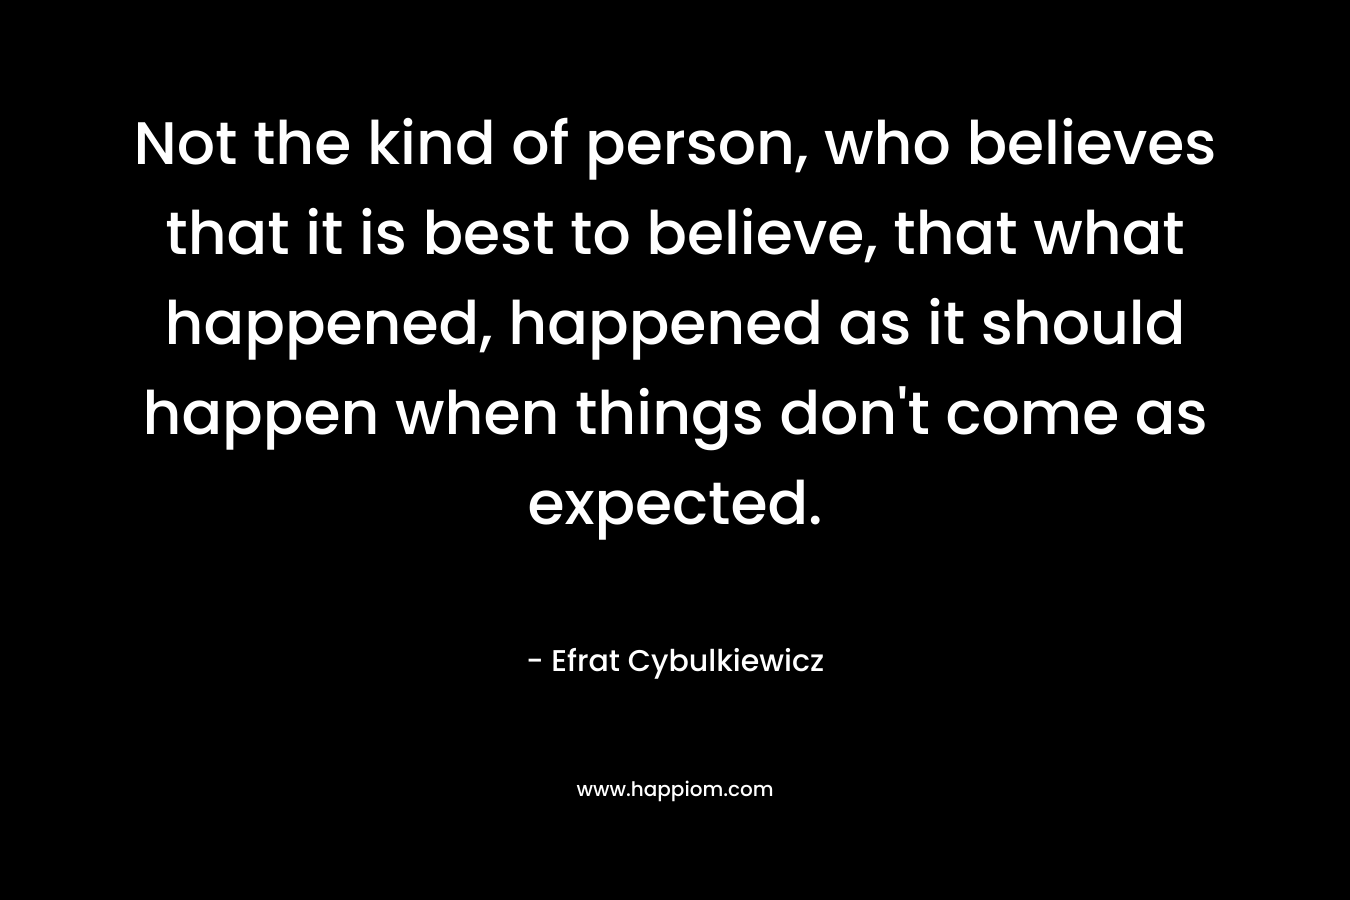 Not the kind of person, who believes that it is best to believe, that what happened, happened as it should happen when things don't come as expected.